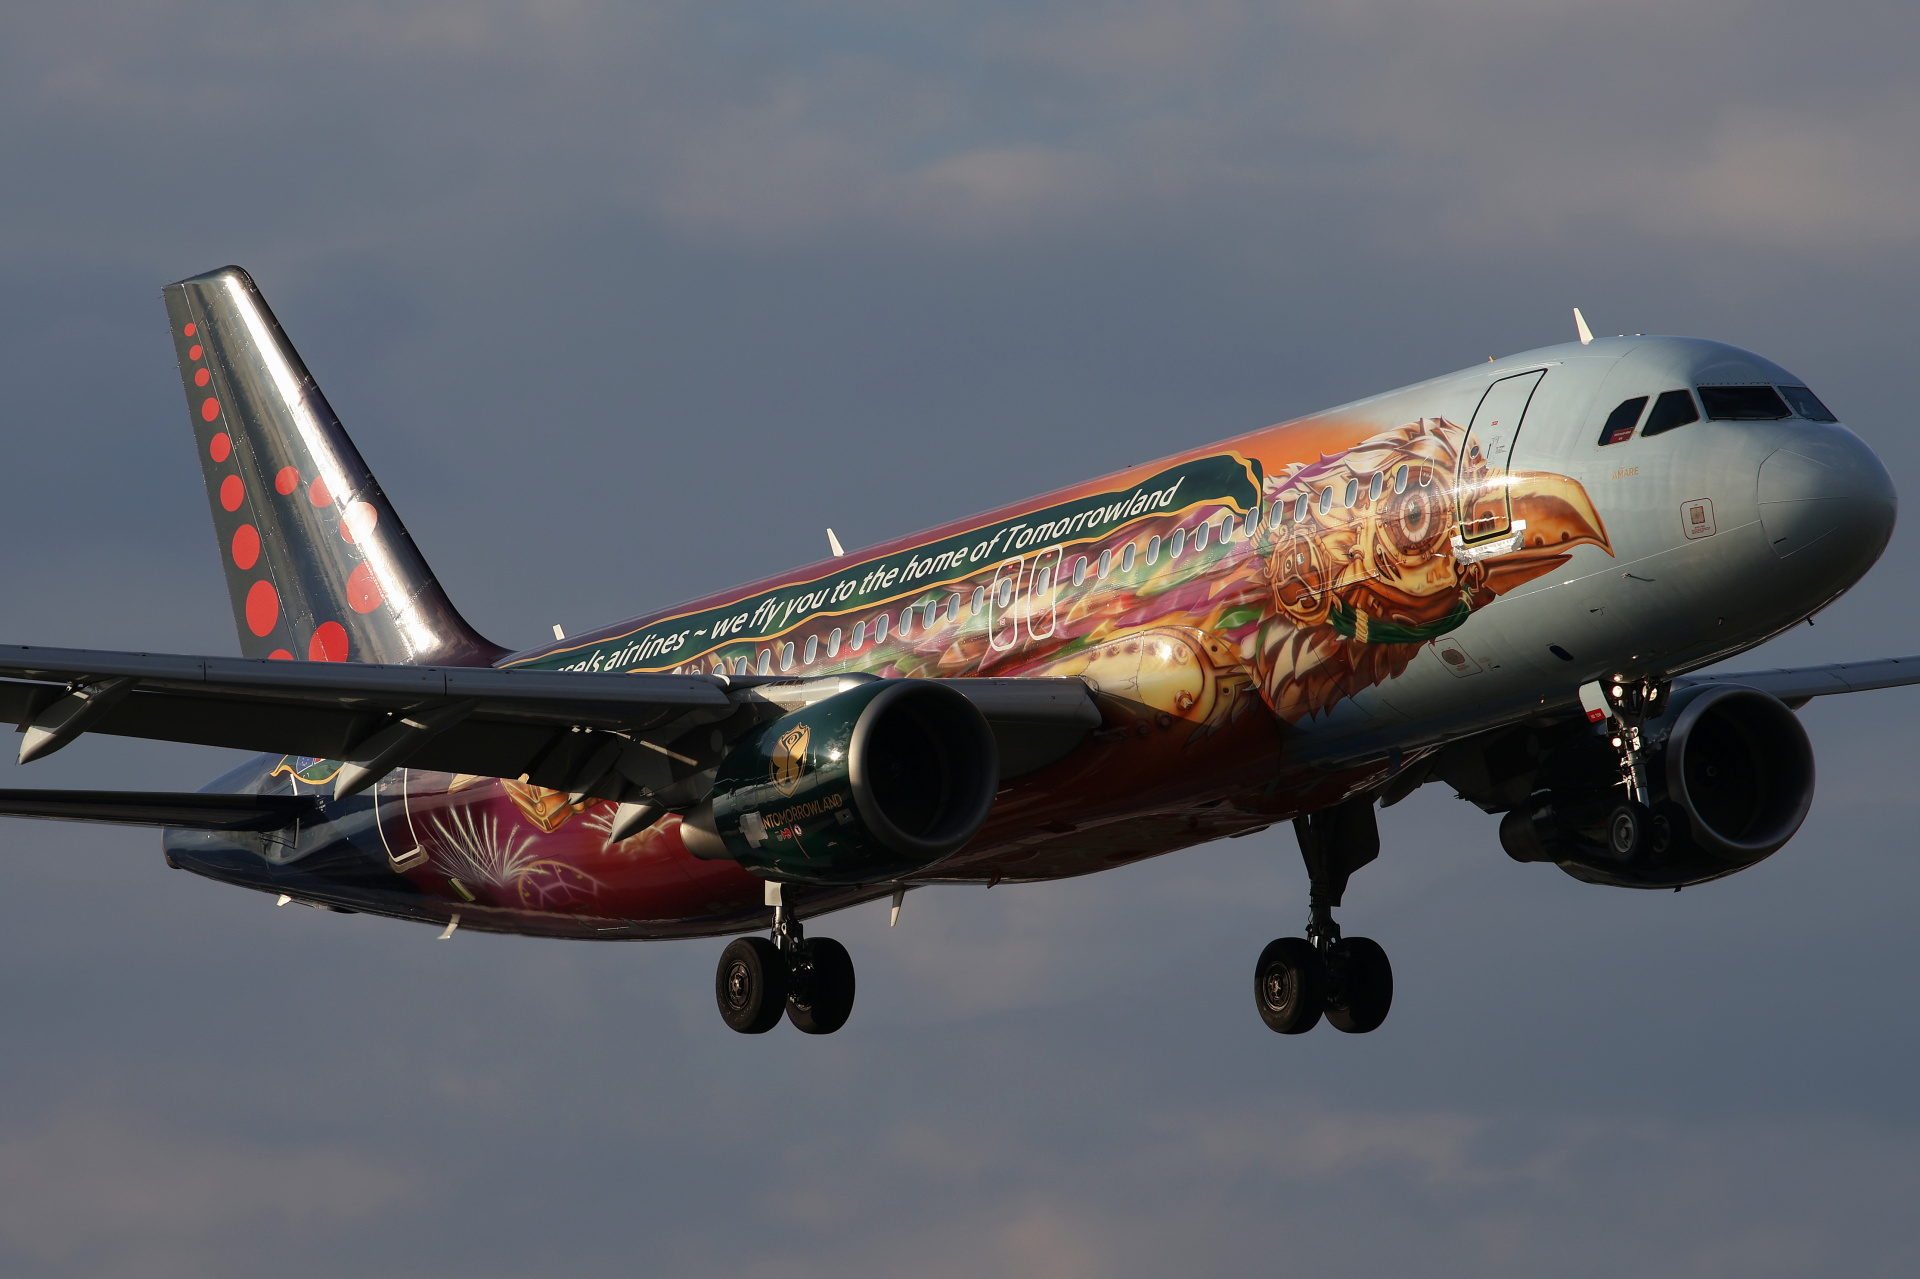 OO-SNF (Belgian Icons - Amare: Tomorrowland livery) (Aircraft » EPWA Spotting » Airbus A320-200 » Brussels Airlines)